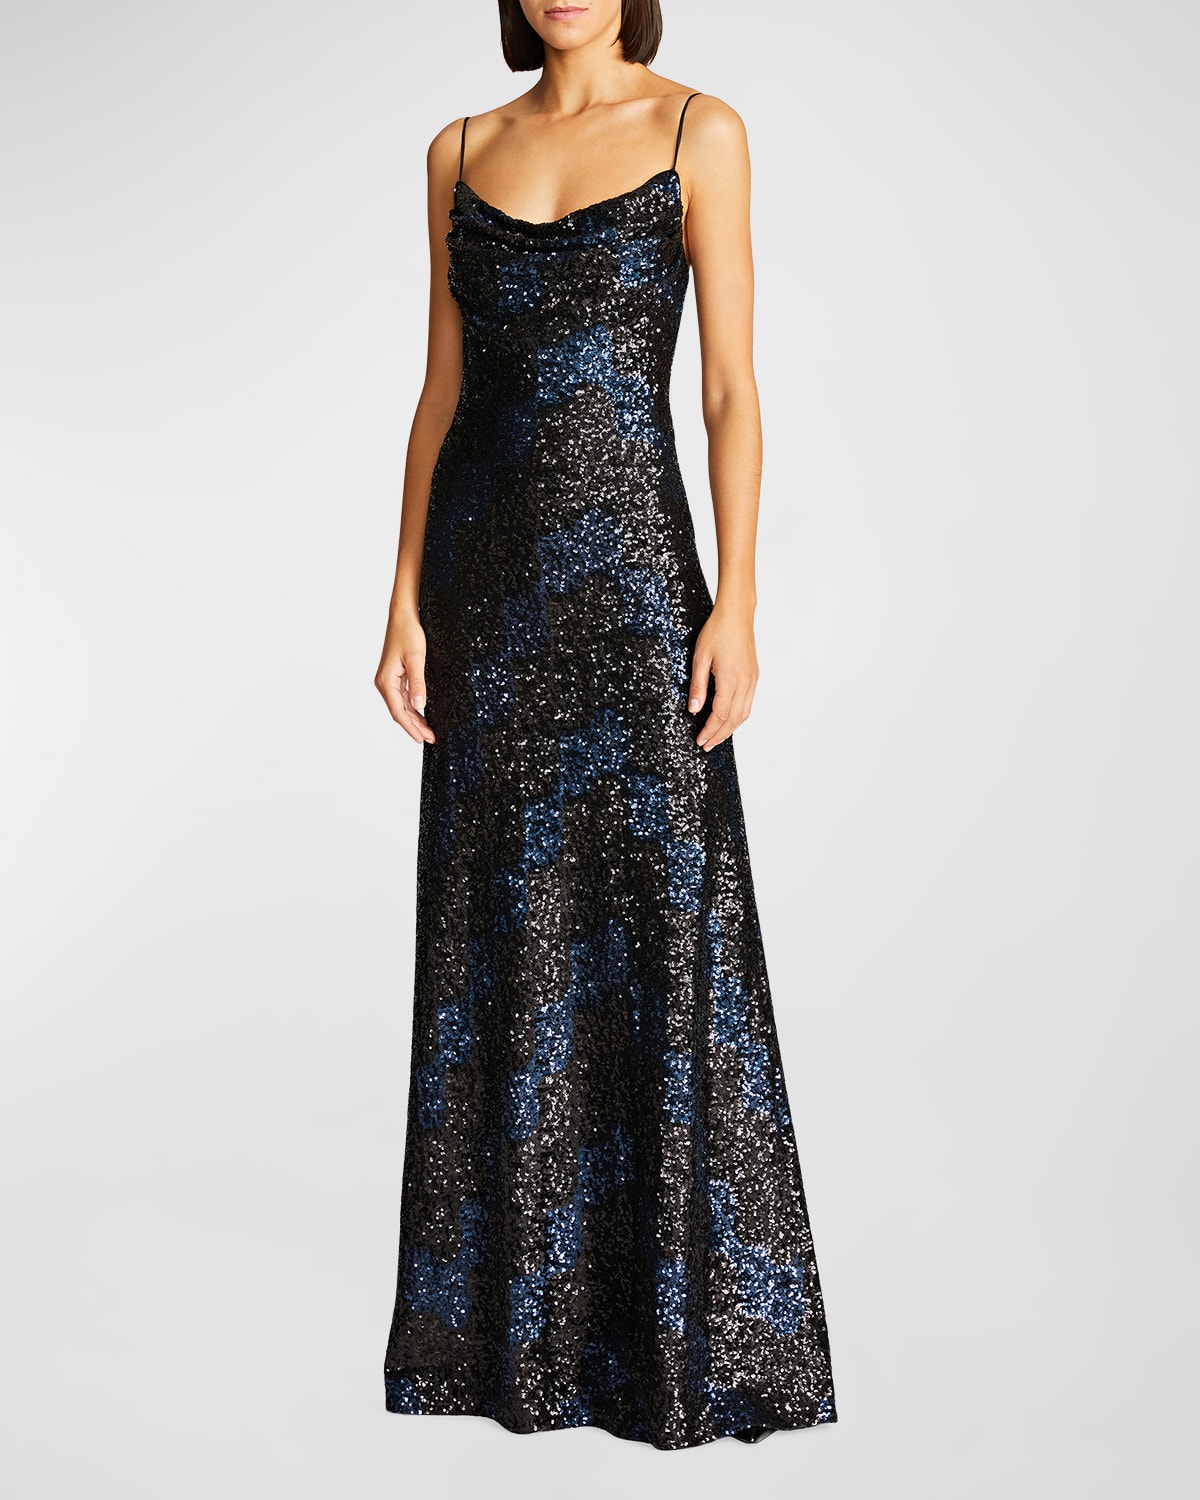 HALSTON SYRENA COWL-NECK WAVE SEQUIN GOWN